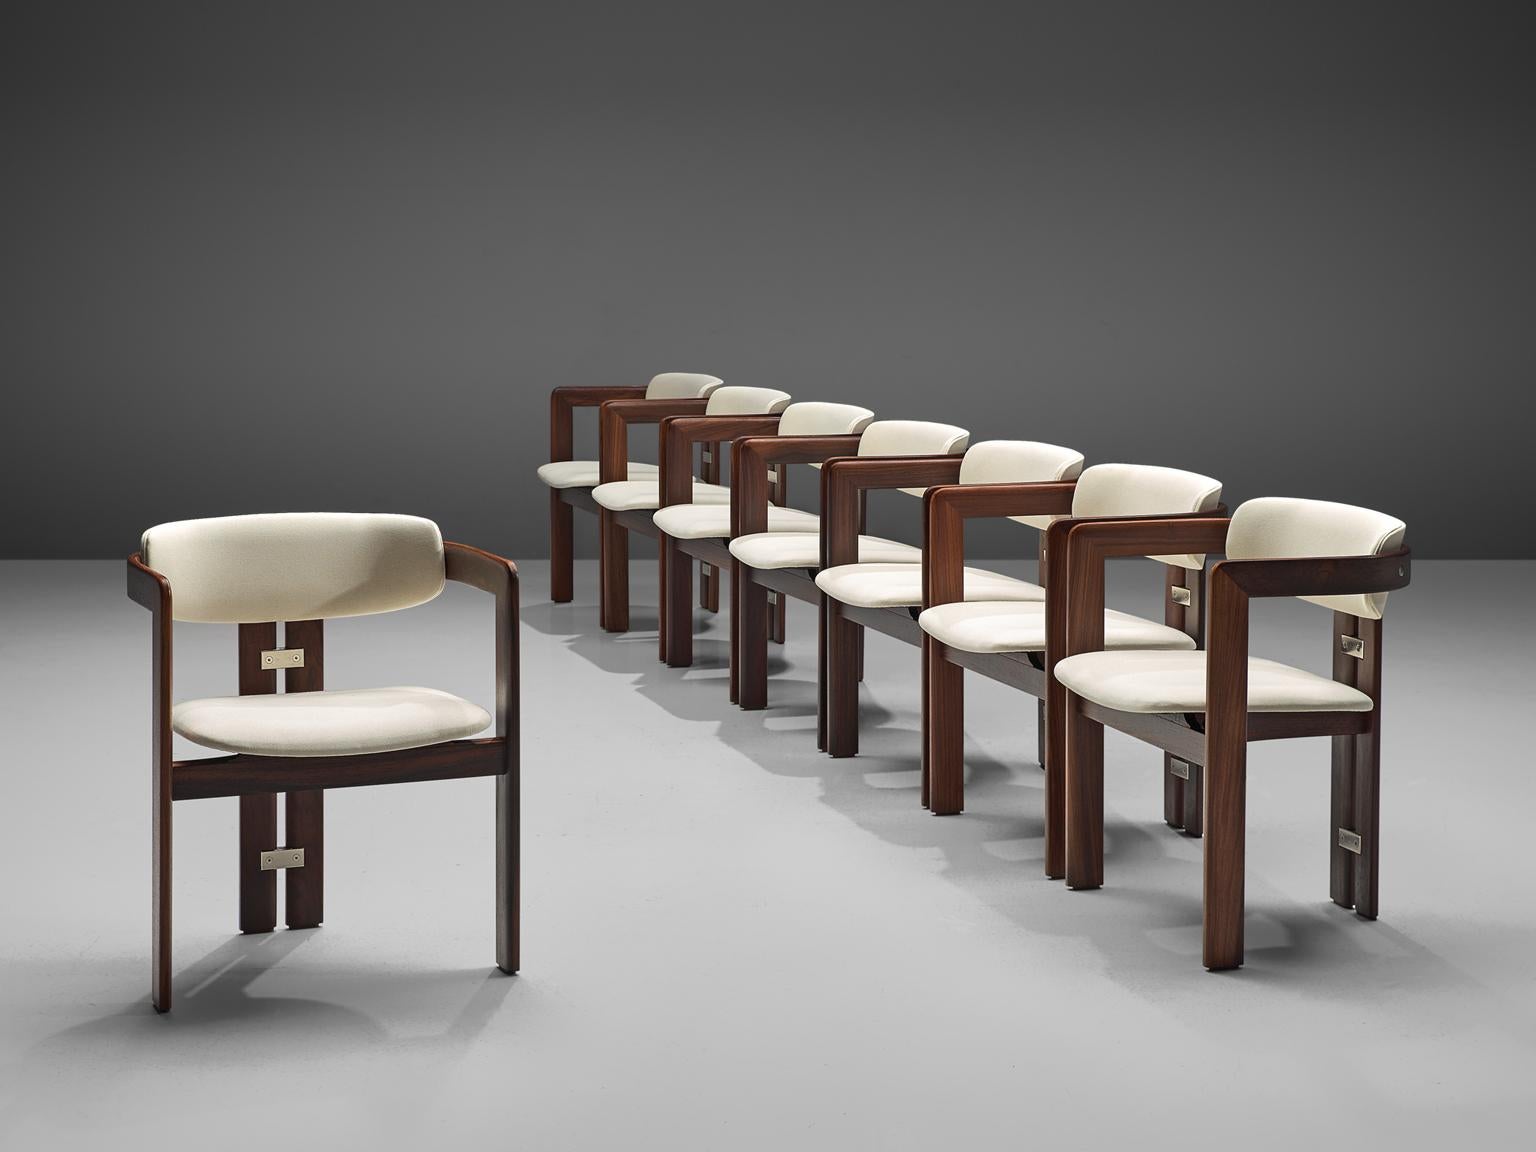 Augusto Savini for Pozzi, set of ten 'Pamplona' dining room chairs, to be reupholstered, glossed wood and metal, Italy, 1965. 

Set of six armchairs in dark glossed rosewood and white fabric upholstery. The chairs have a unique and characteristic